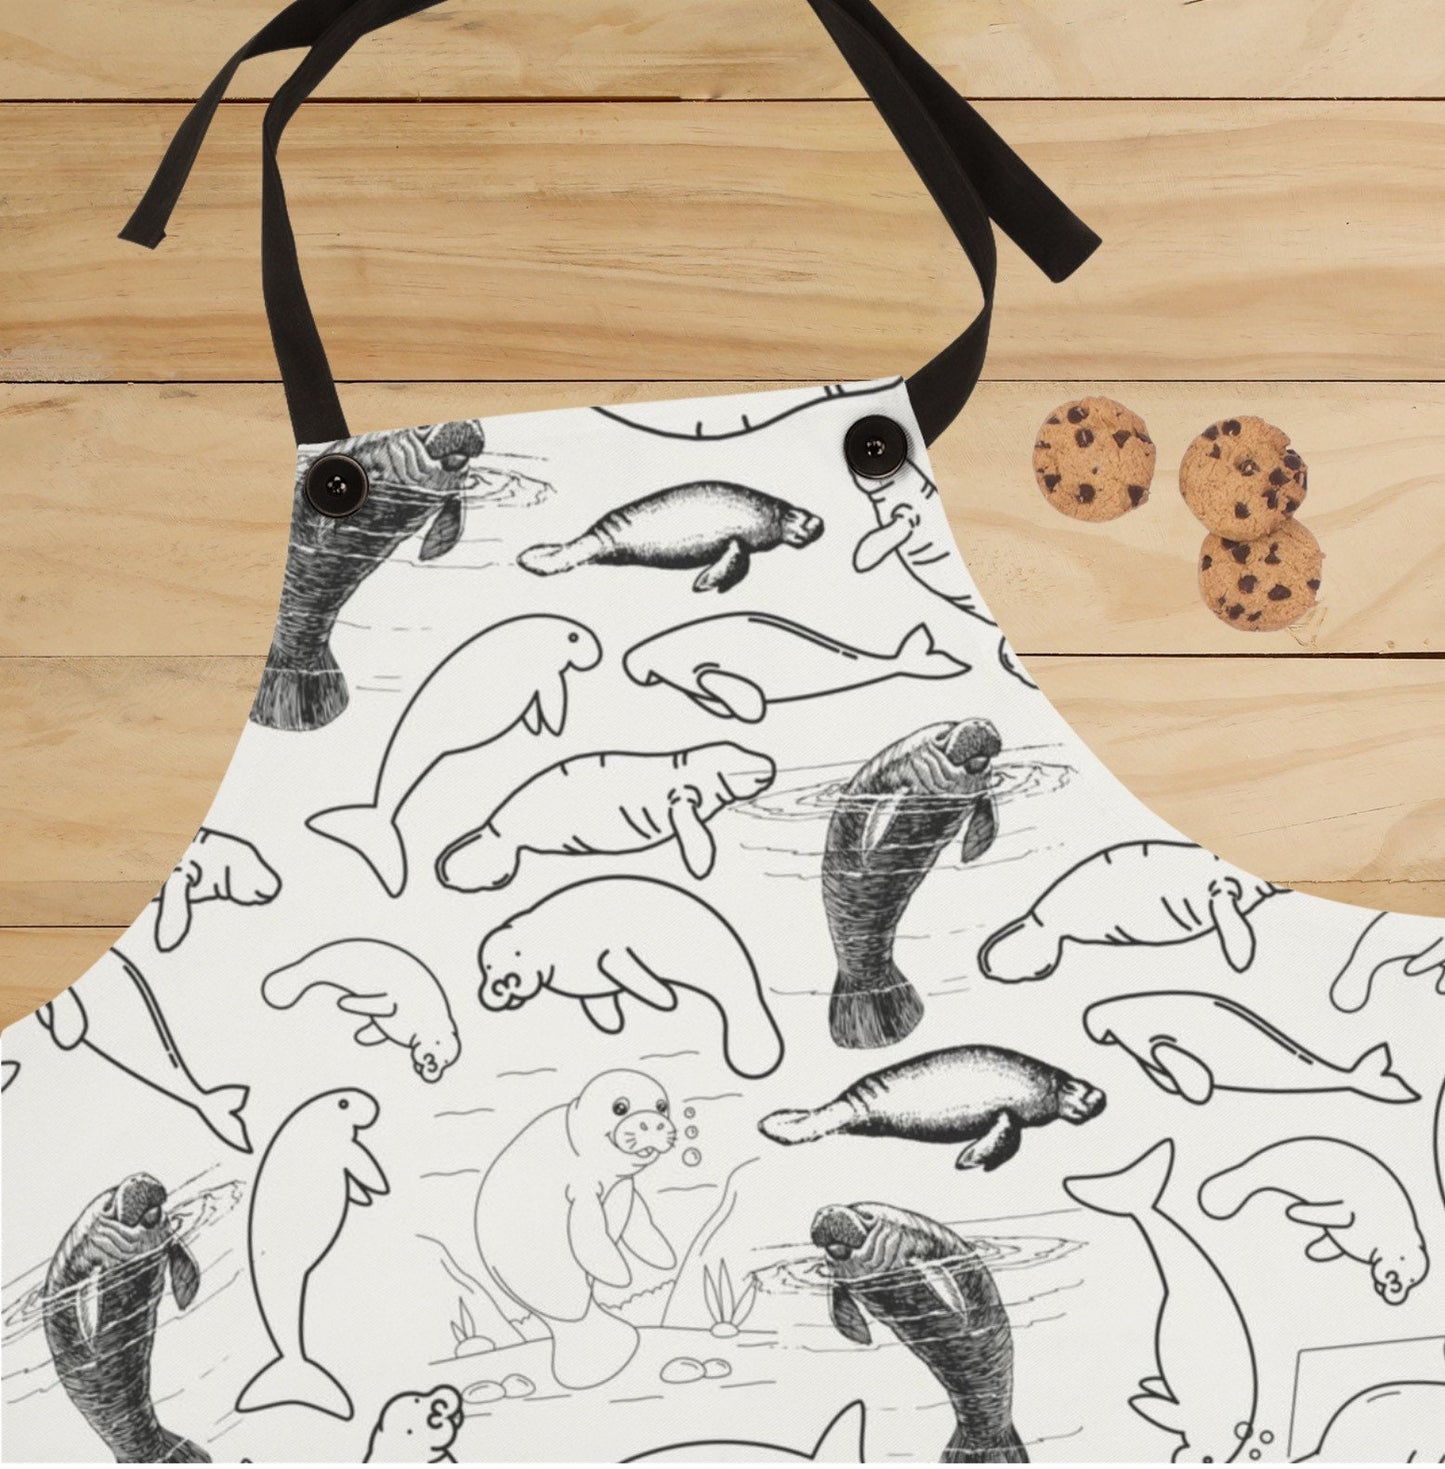 Manatee Apron, Gift For Manatee Lover, Present For Manatee Fan, Home Decor Kitchen Items Marine Biology, Florida Resident Kitchen